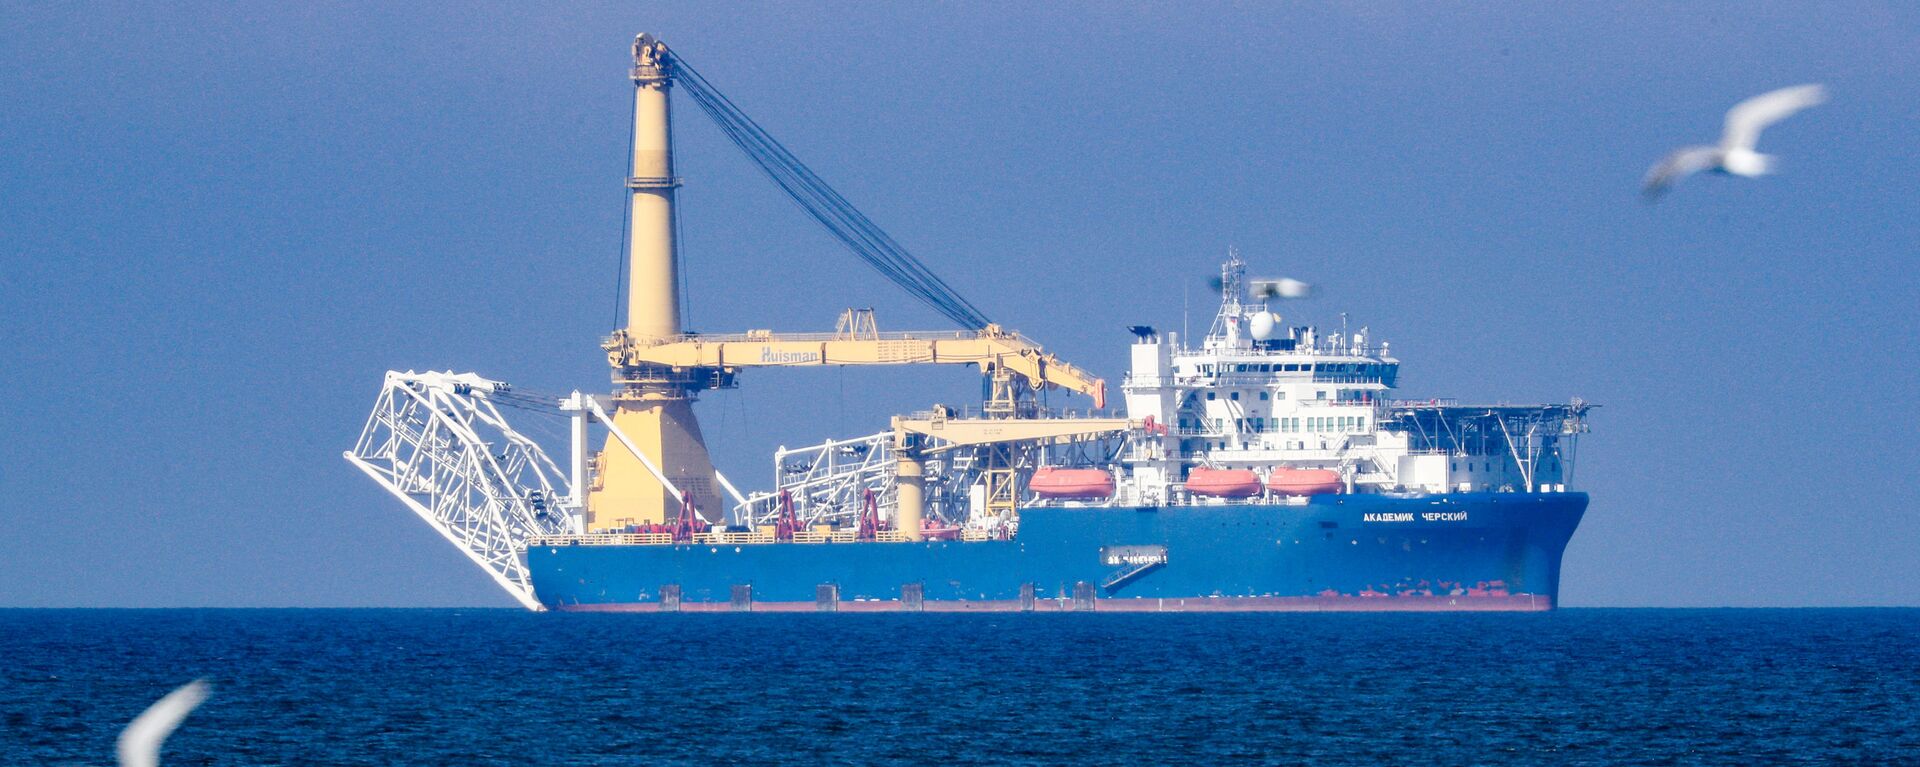 The Russian pipe layer vessel Akademik Cherskiy is pictured in the waters of Kaliningrad, Russia. Pipe-laying vessel Akademik Chersky is able to complete the construction of the Nord Stream 2 gas pipeline - Sputnik International, 1920, 10.04.2023